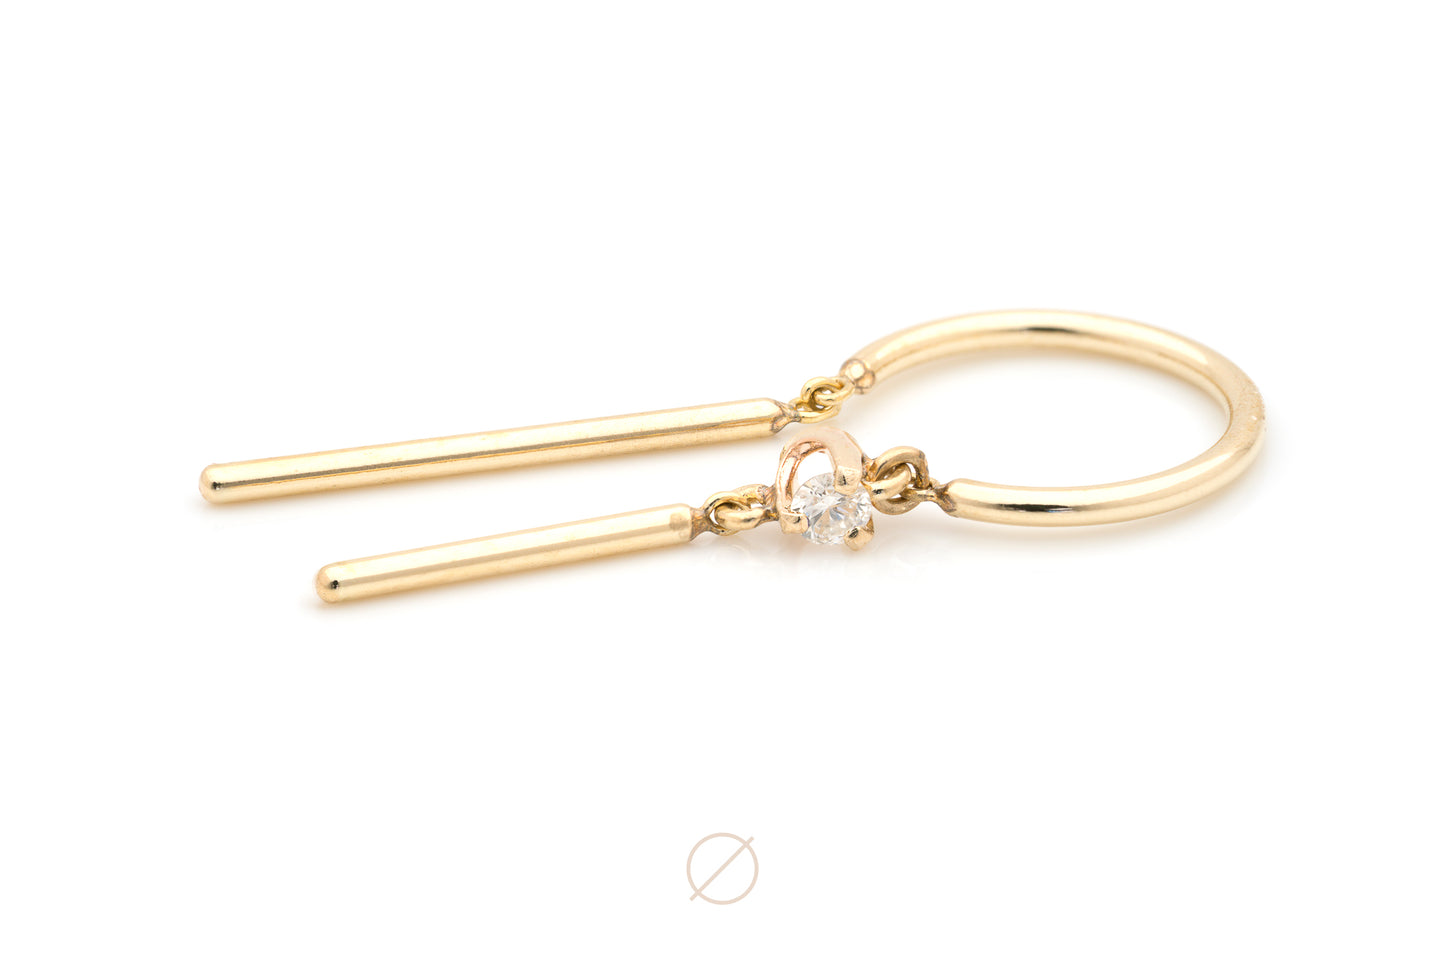 Diamond Chime in Yellow Gold by Jack + G